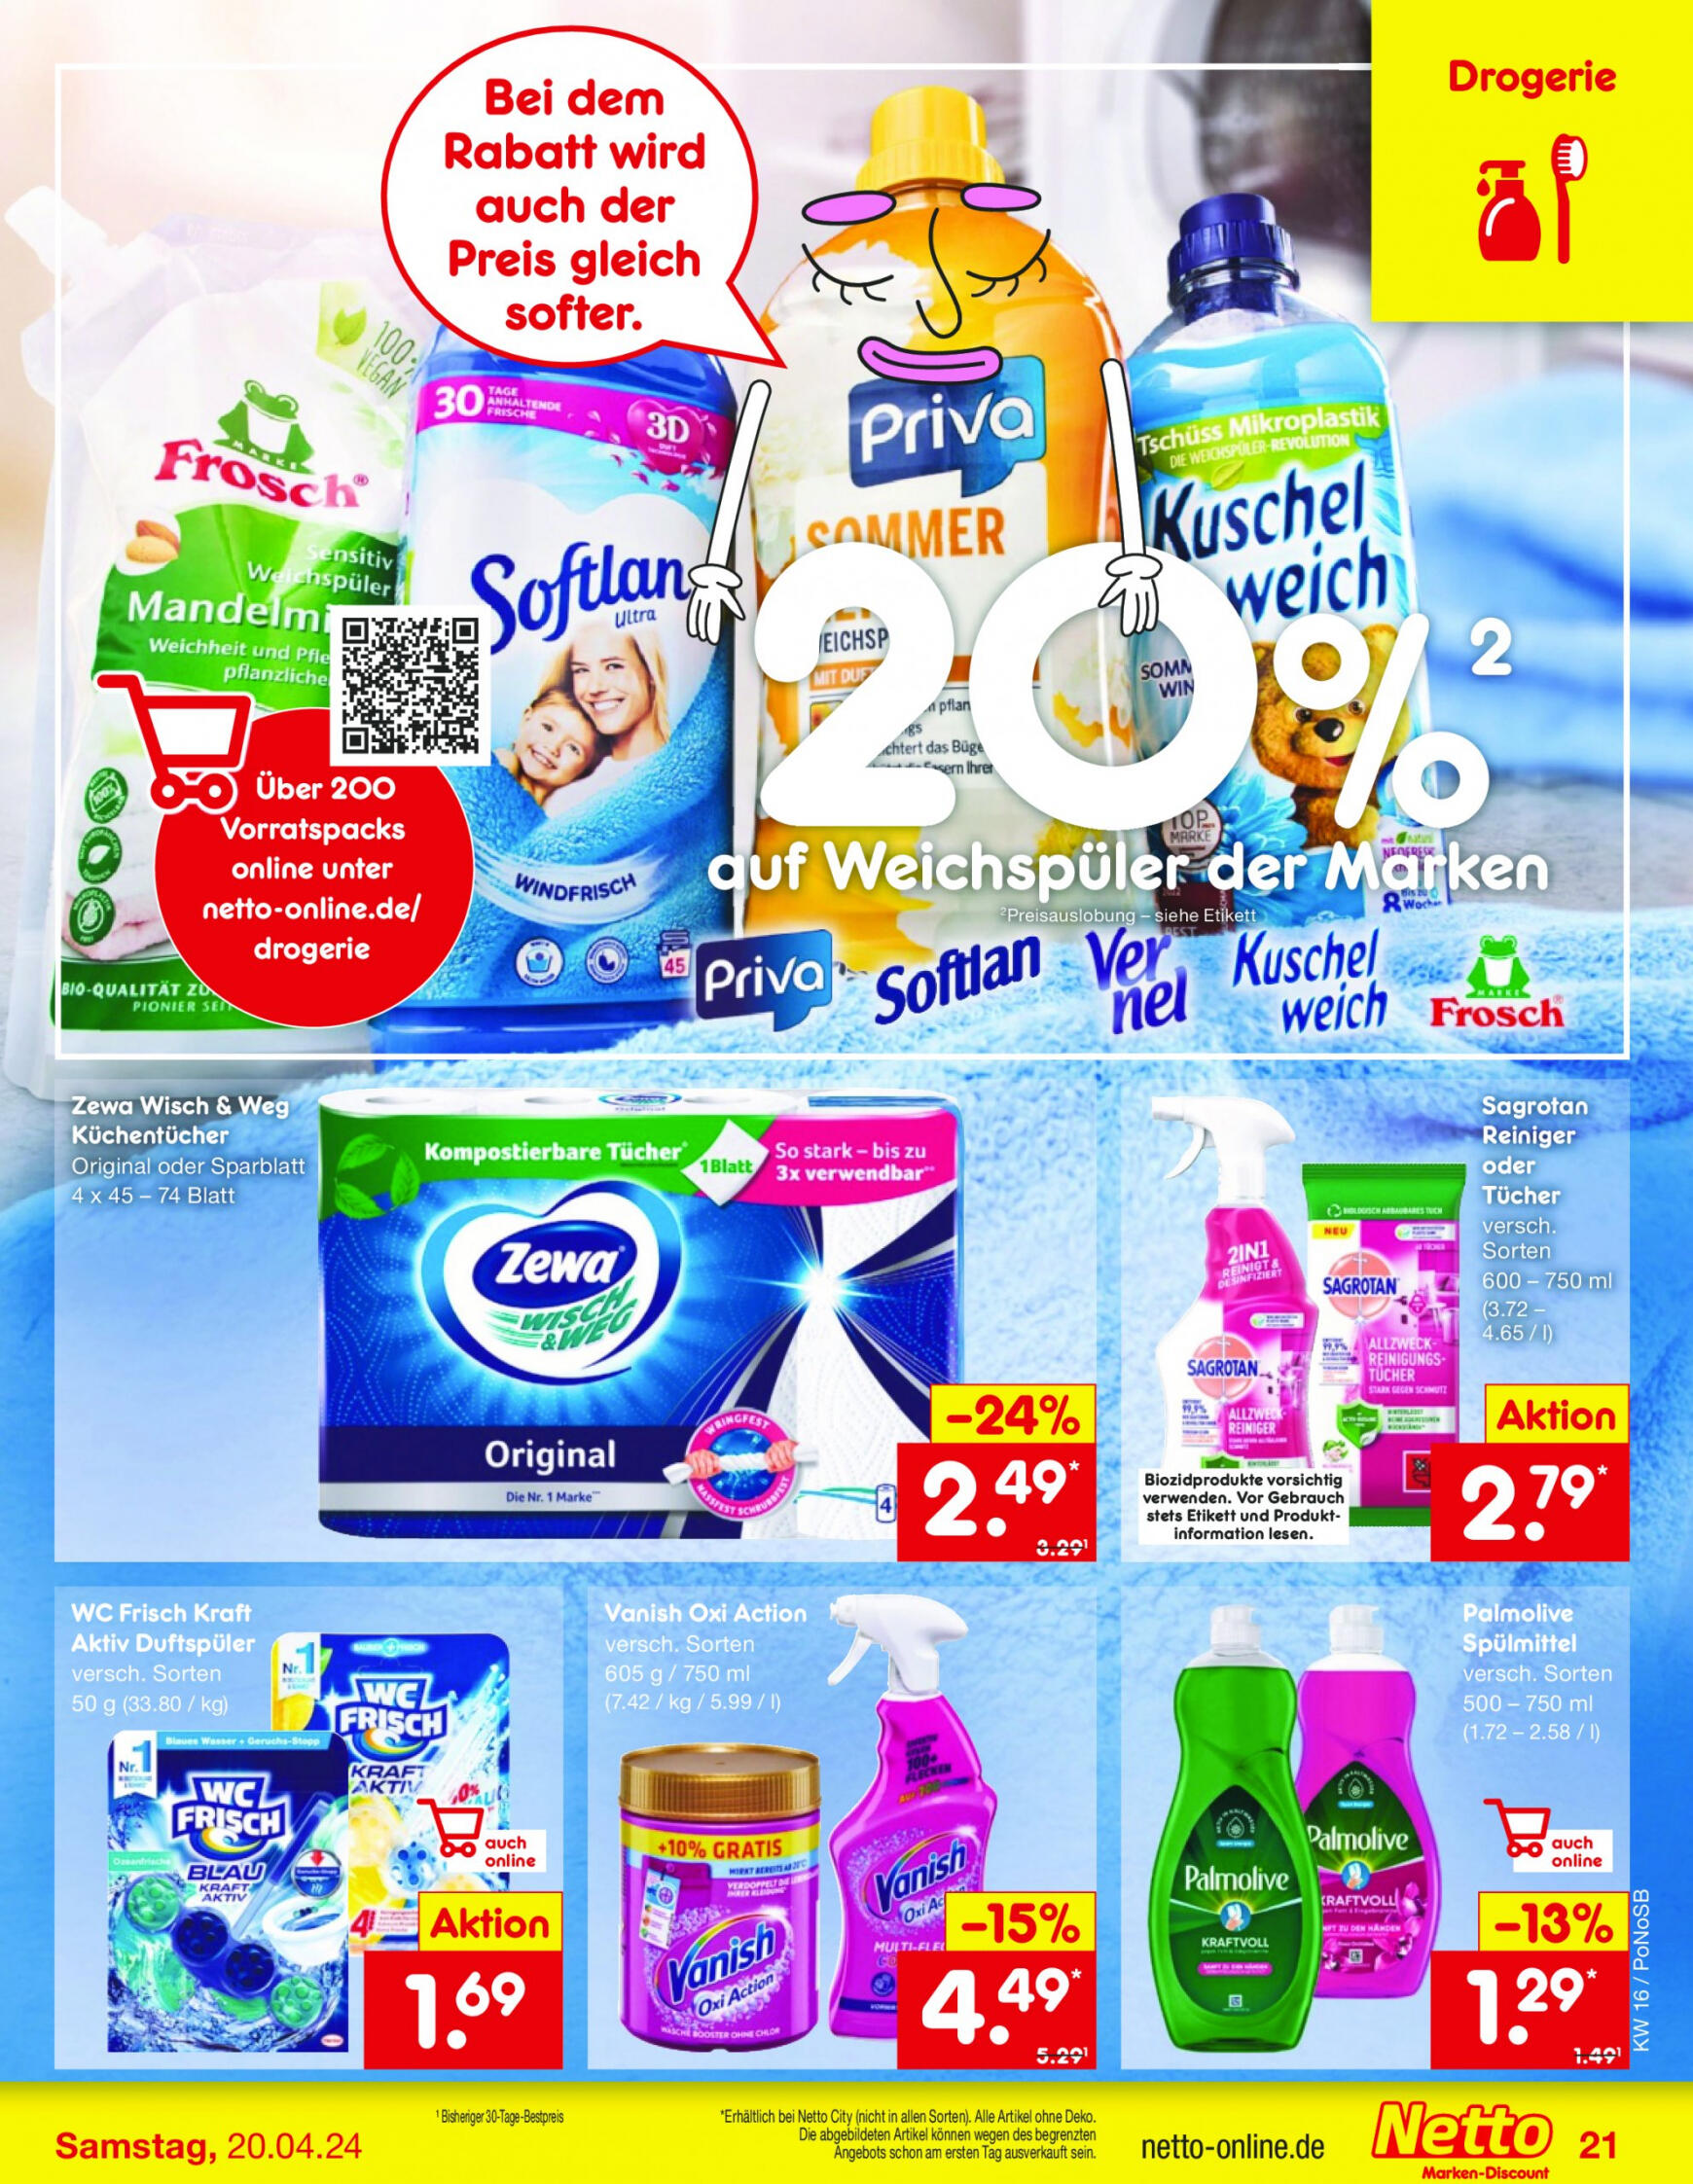 netto - Flyer Netto aktuell 15.04. - 20.04. - page: 27